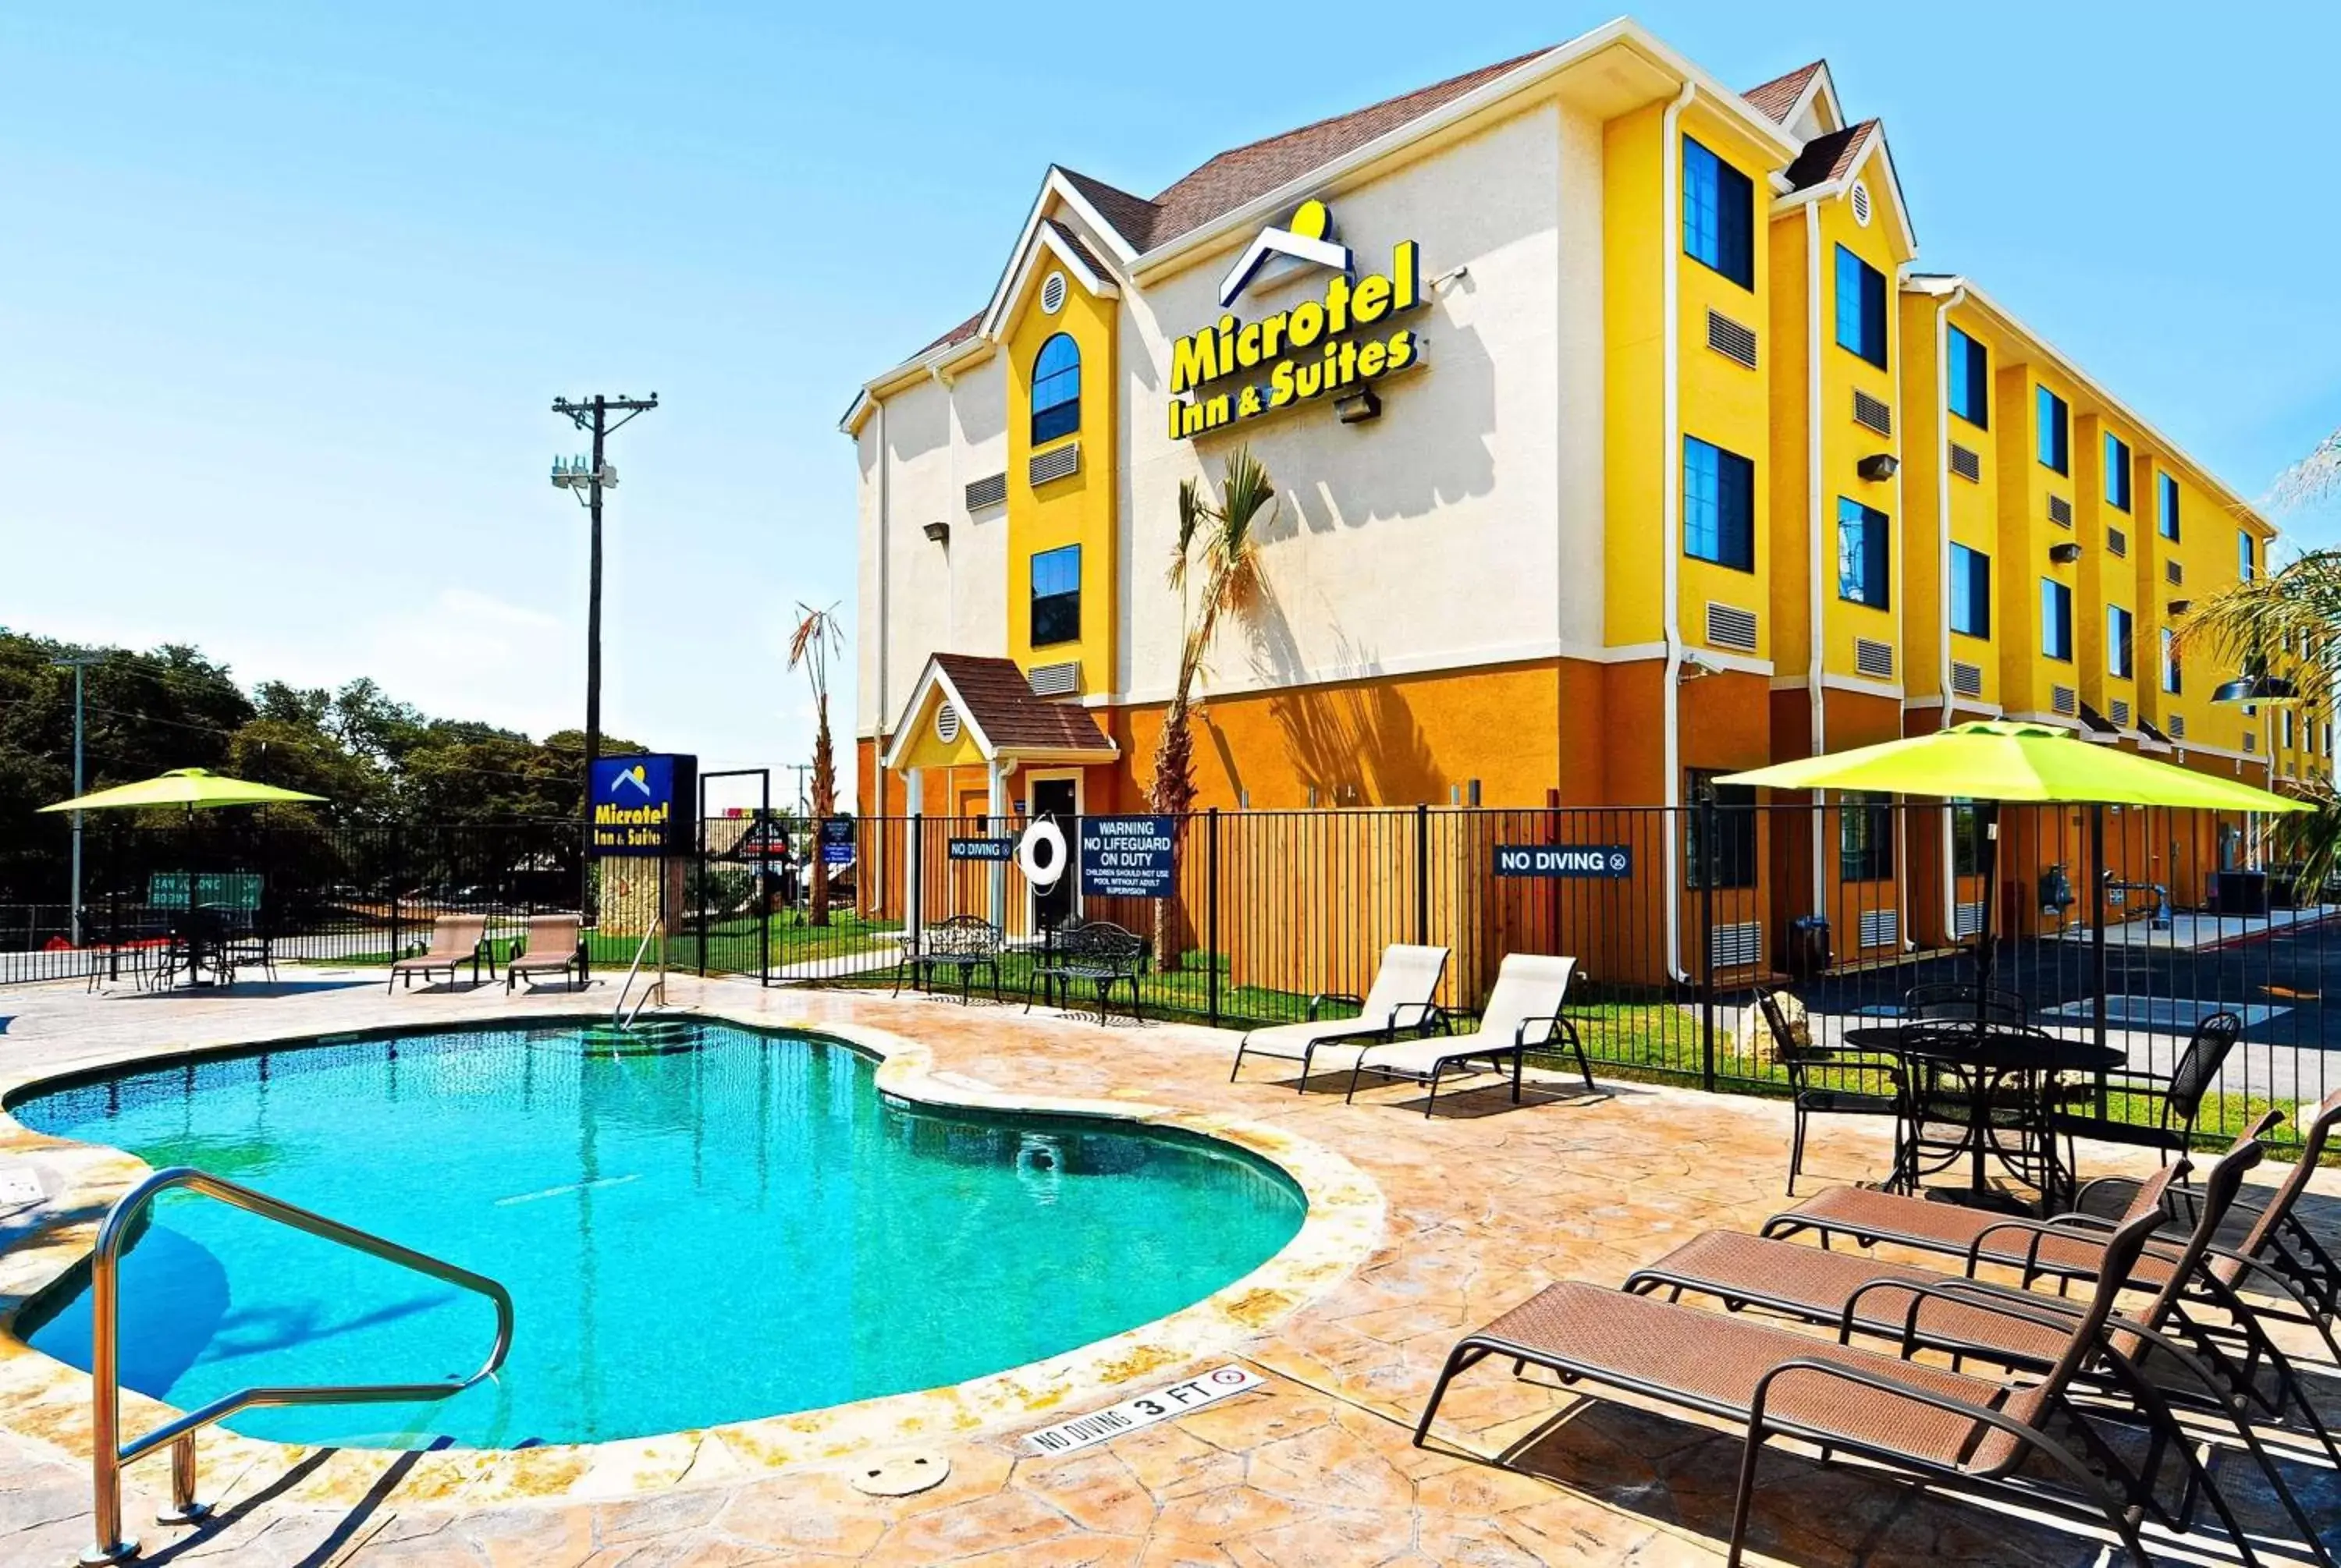 Swimming pool, Property Building in Microtel Inn & Suites by Wyndham New Braunfels I-35